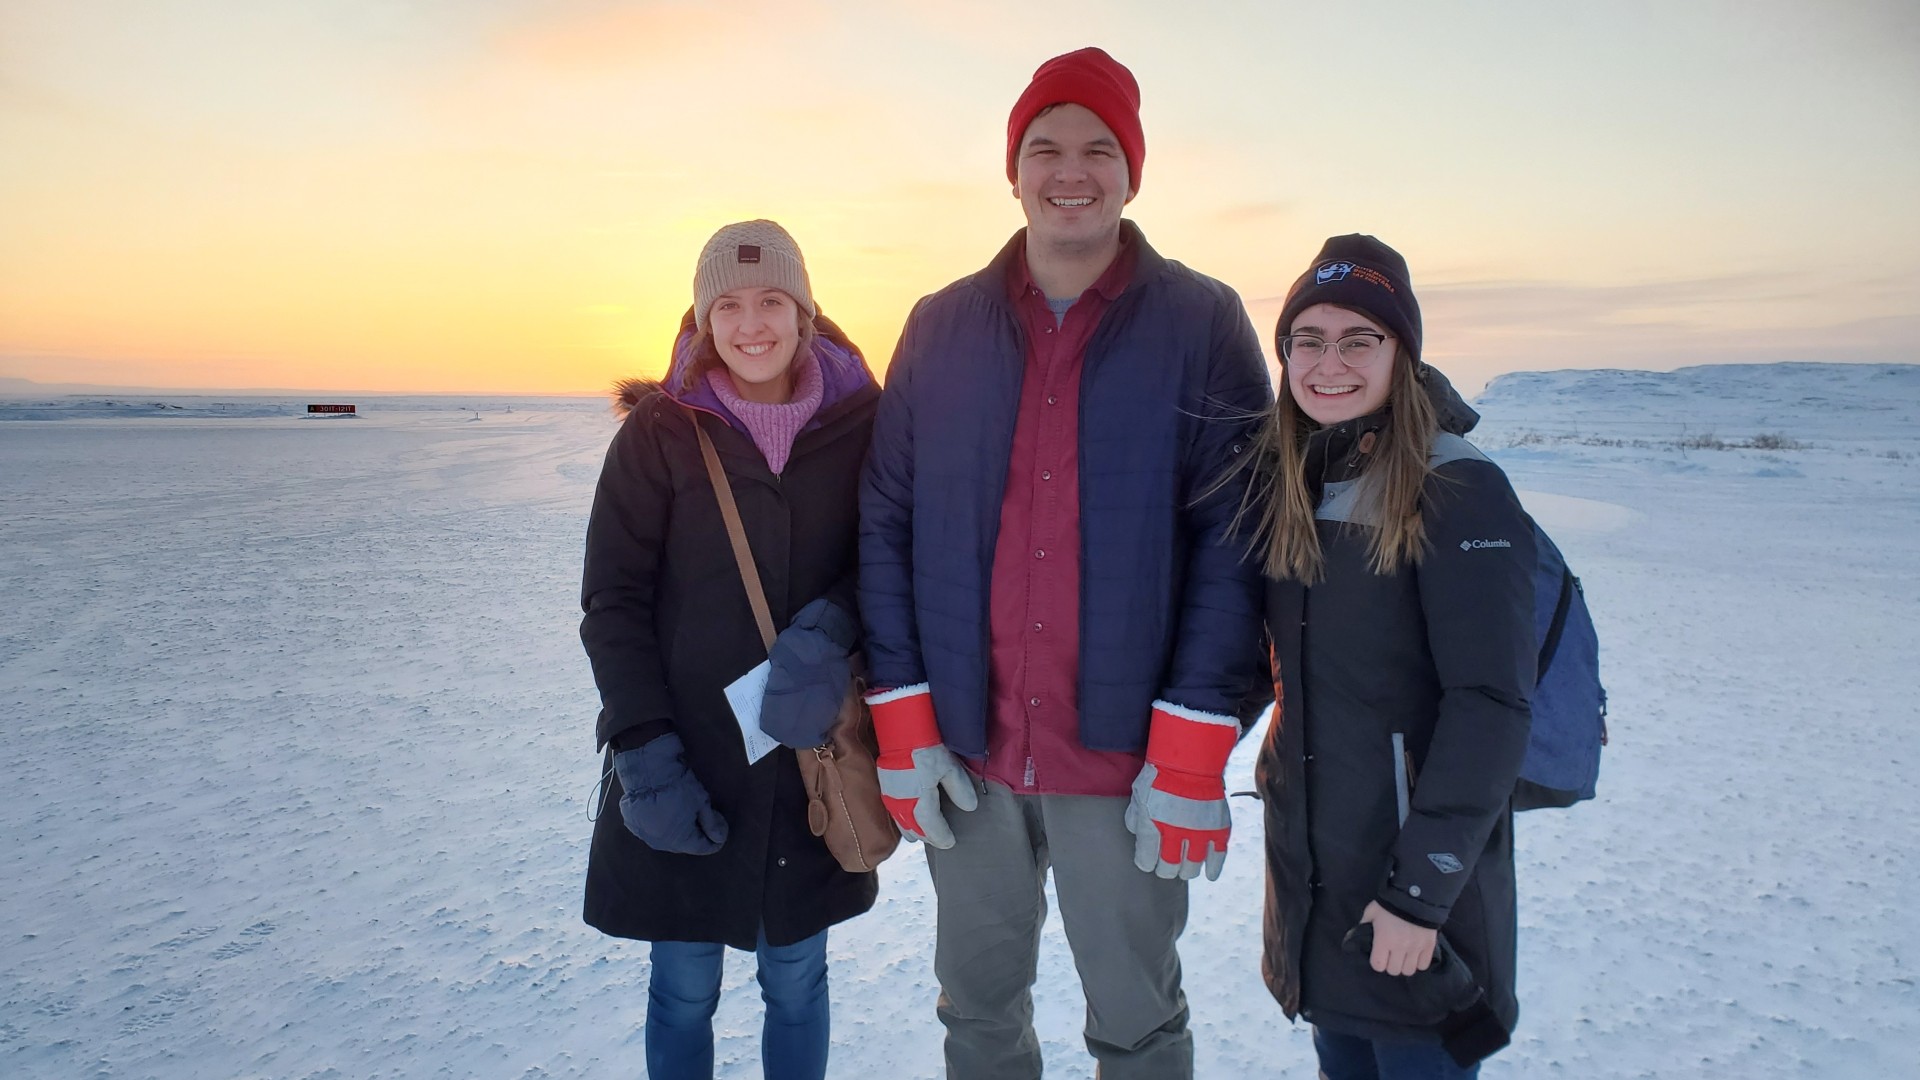 Three people standing outside on snowy ground with a sunrise or sunset in the background